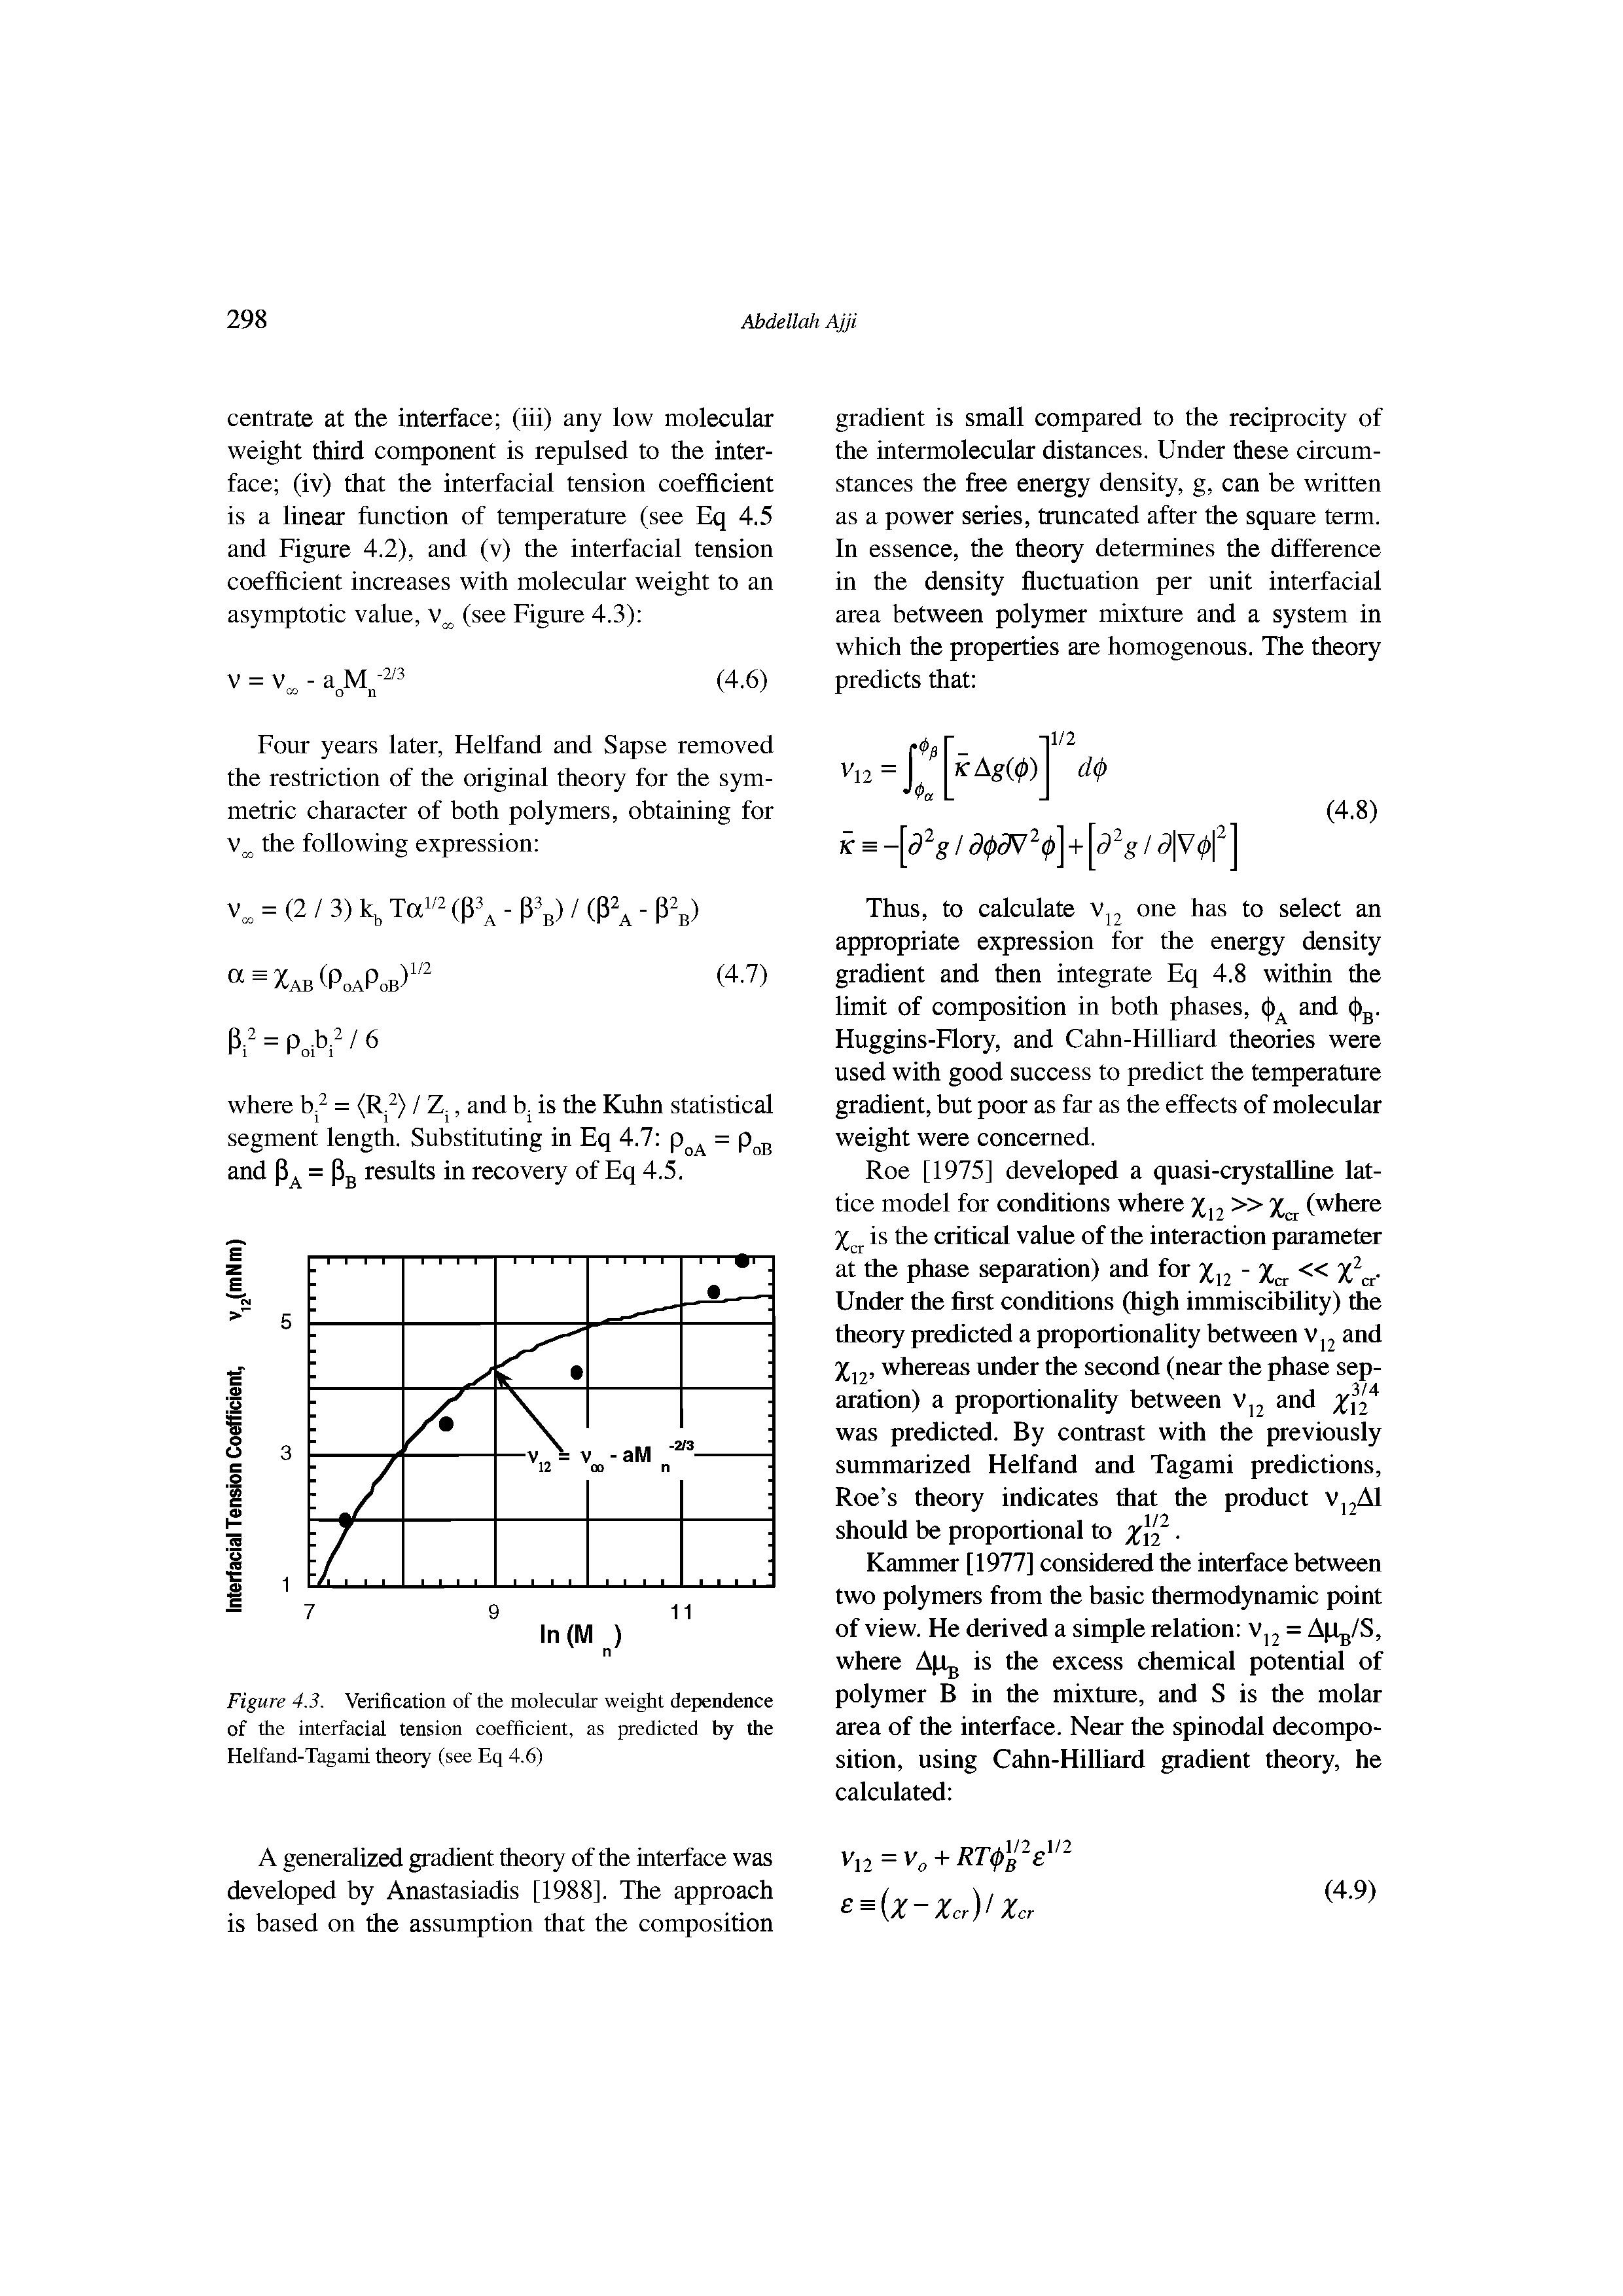 Figure 4.3. Verification of the molecular weight dependence of the interfacial tension coefficient, as predicted by the Helfand-Tagami theory (see Eq 4.6)...